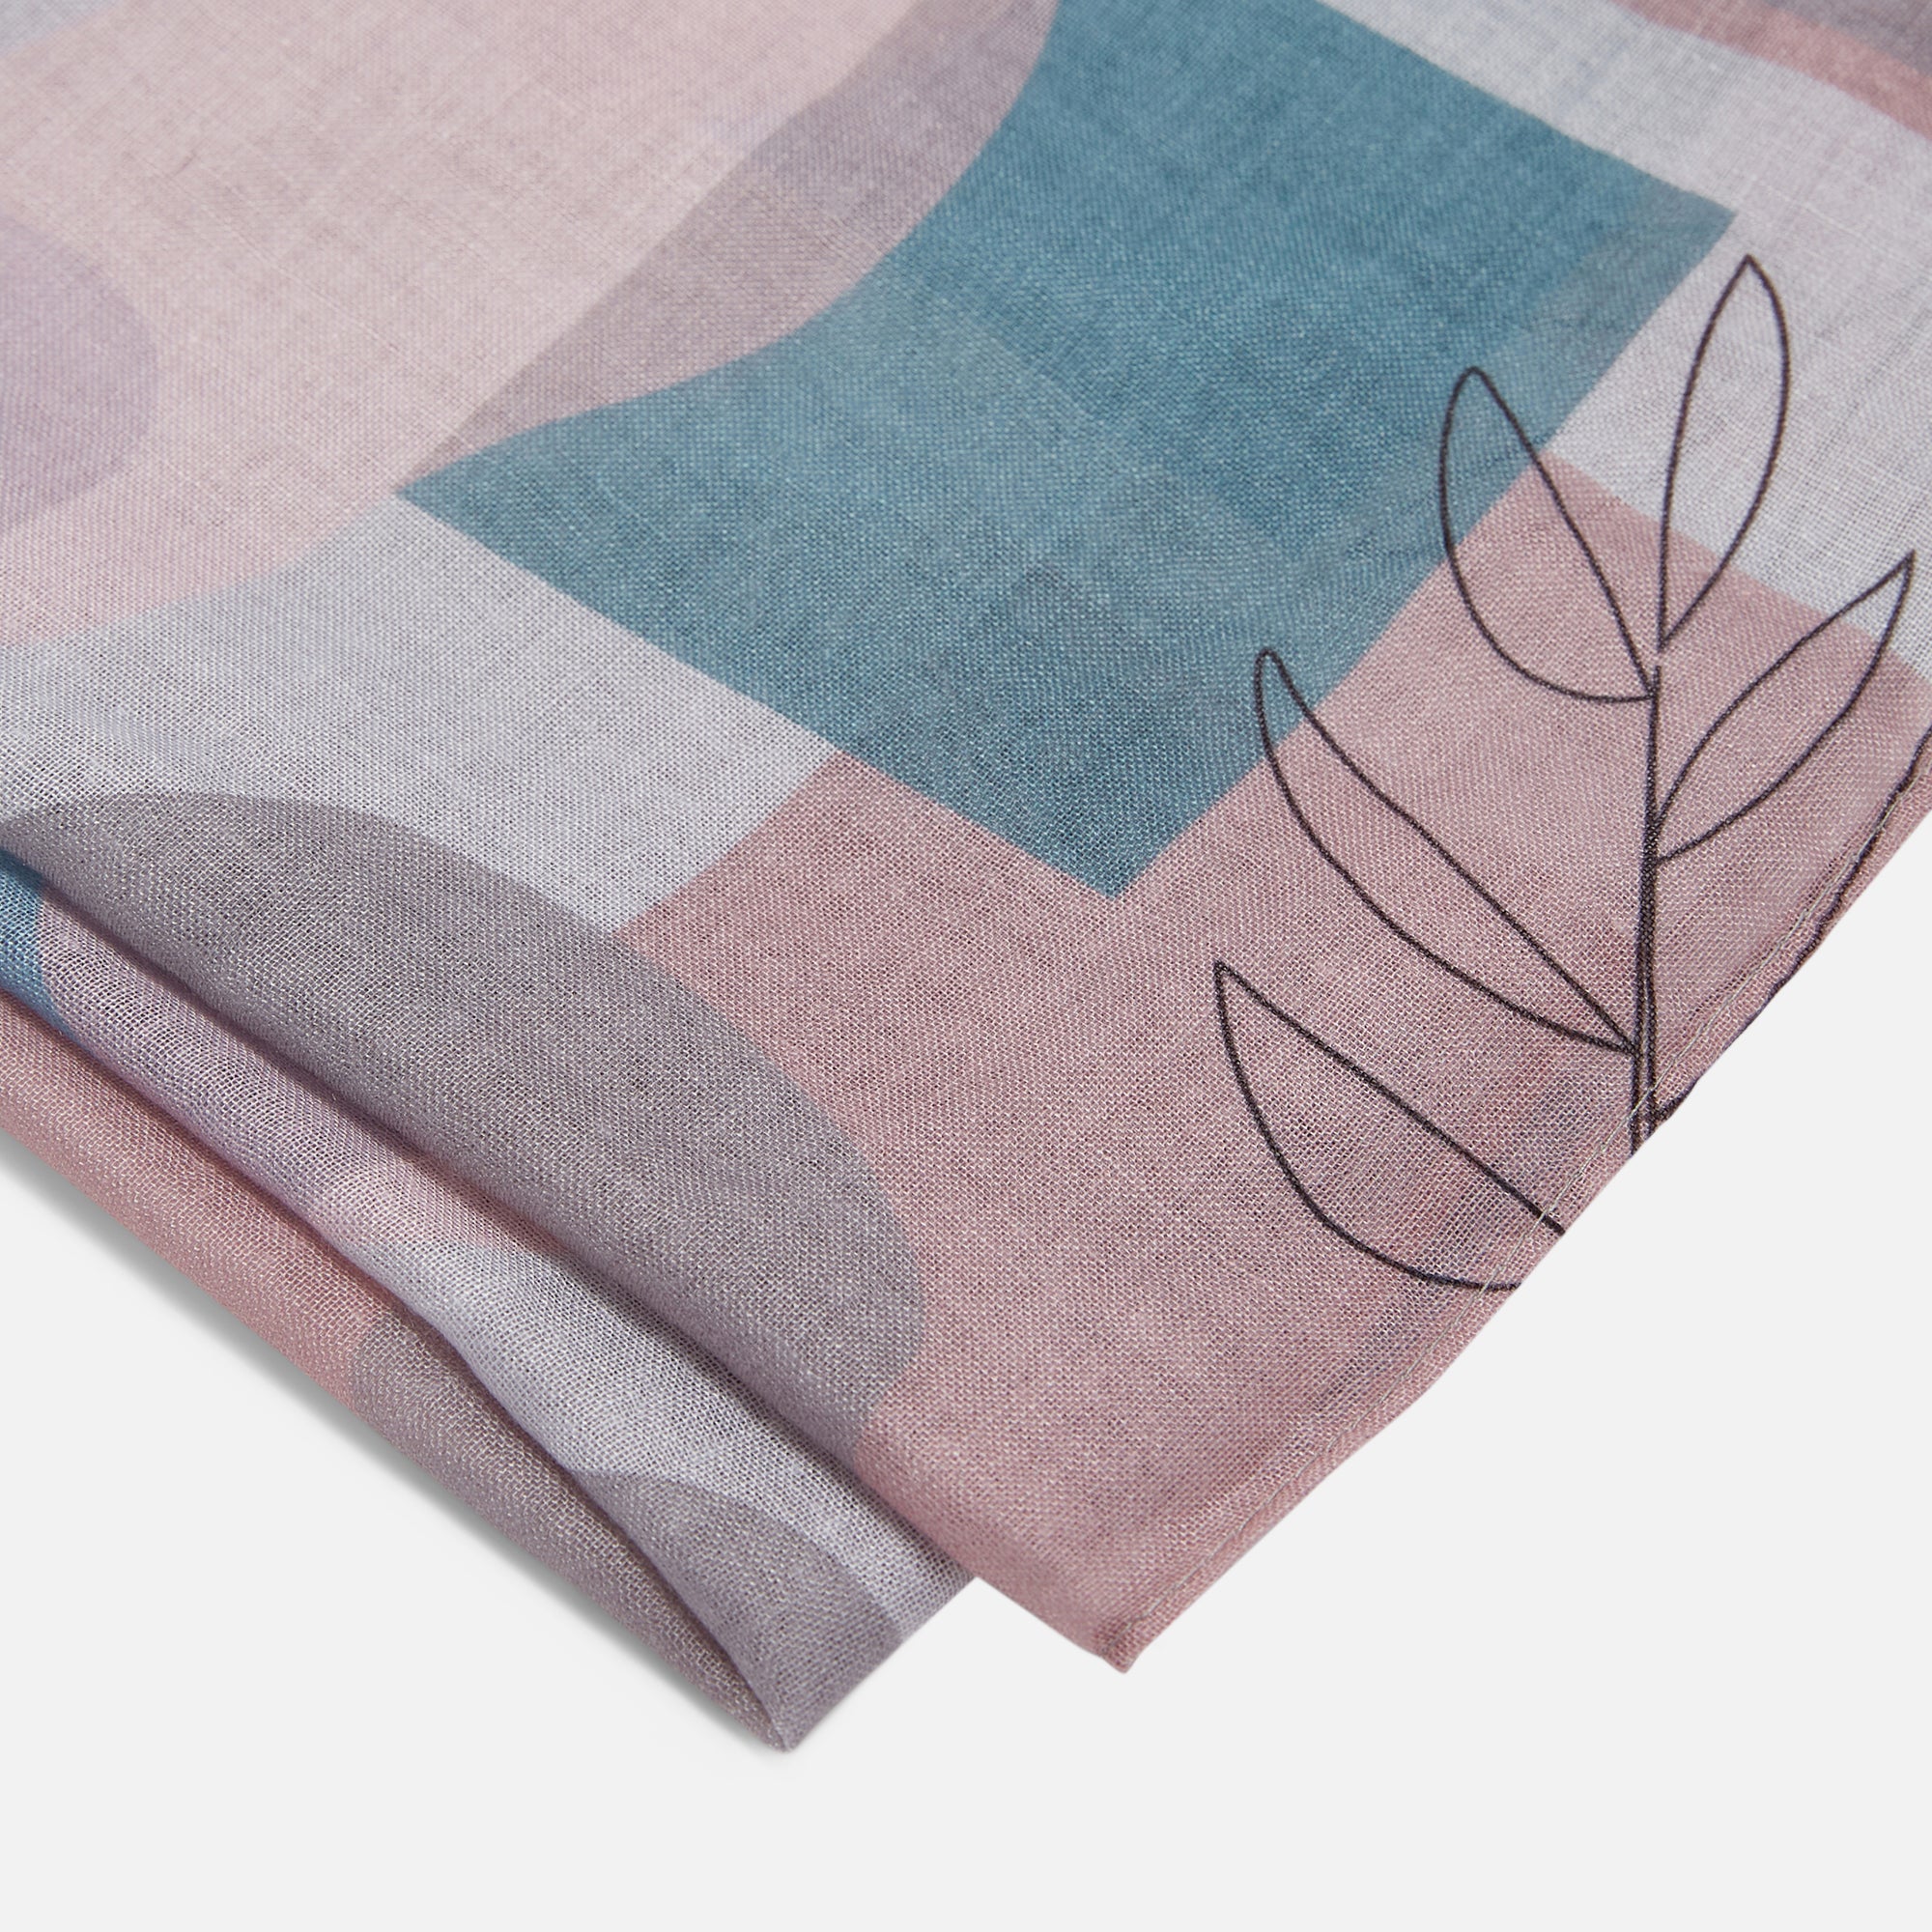 Blue and pink rectangle scarf with abstract patterns and leaves